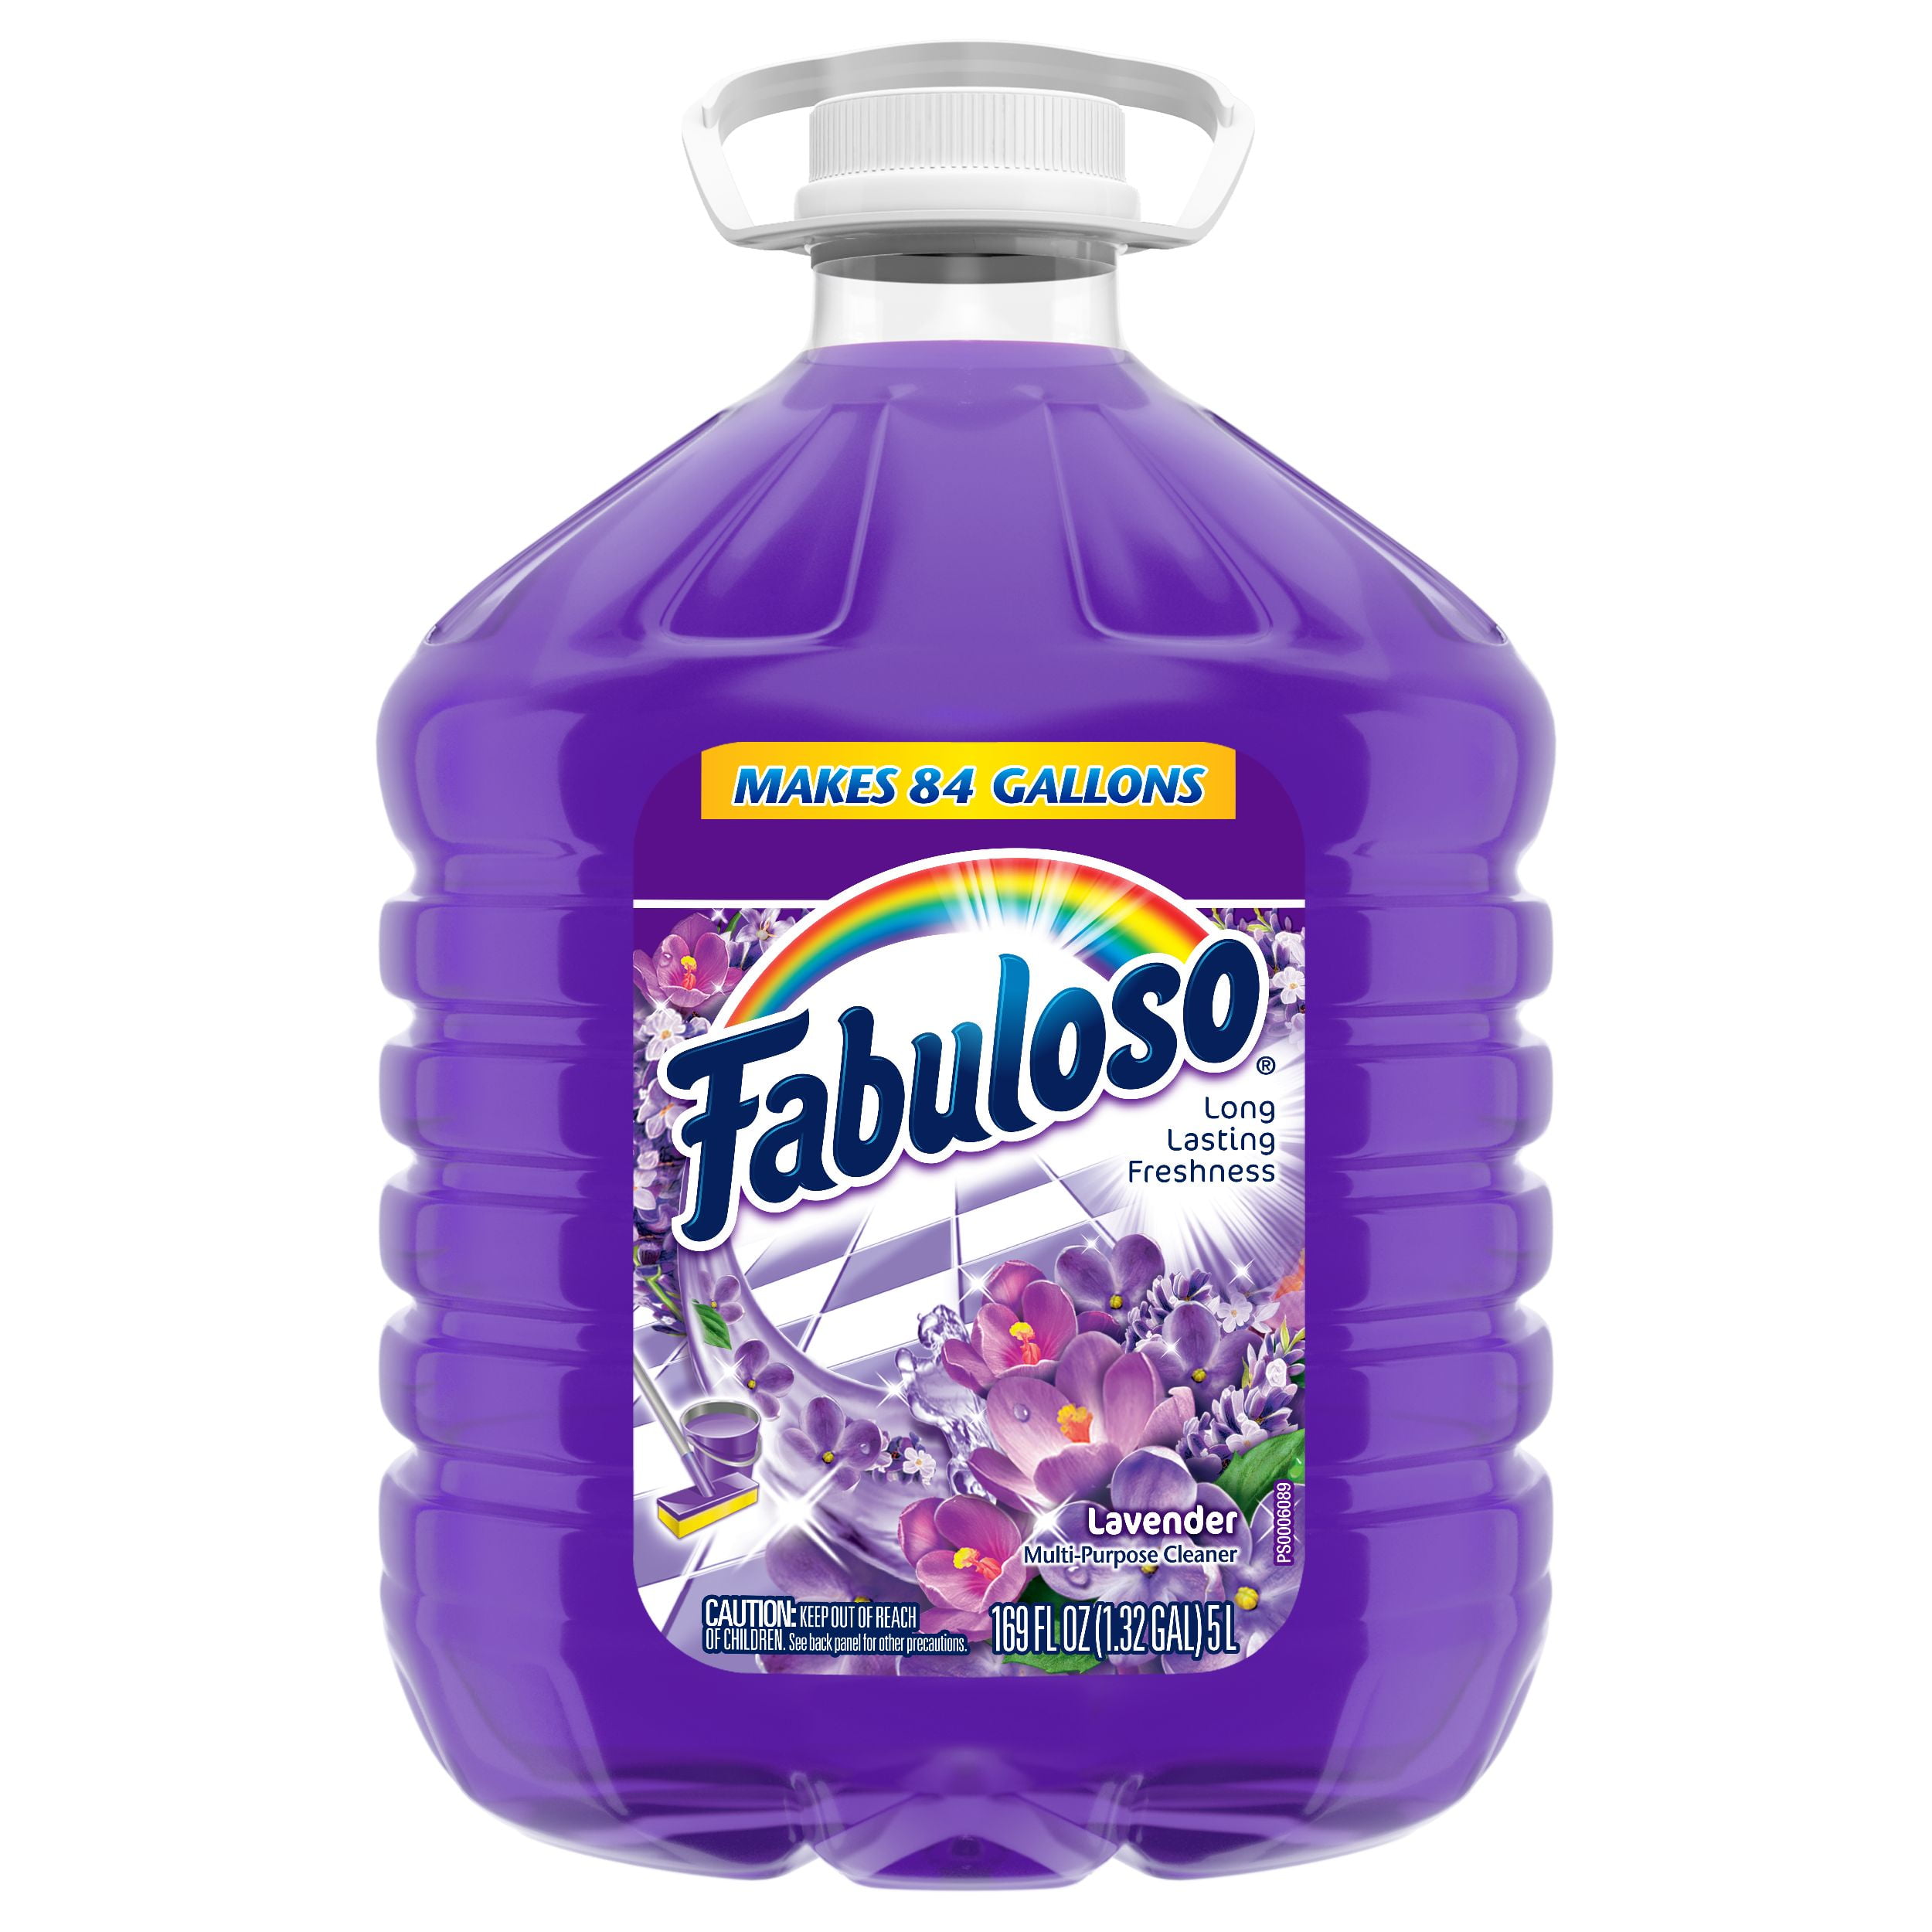 Fabuloso All Purpose Cleaner Lavender, Can Fabuloso Be Used To Clean Hardwood Floors